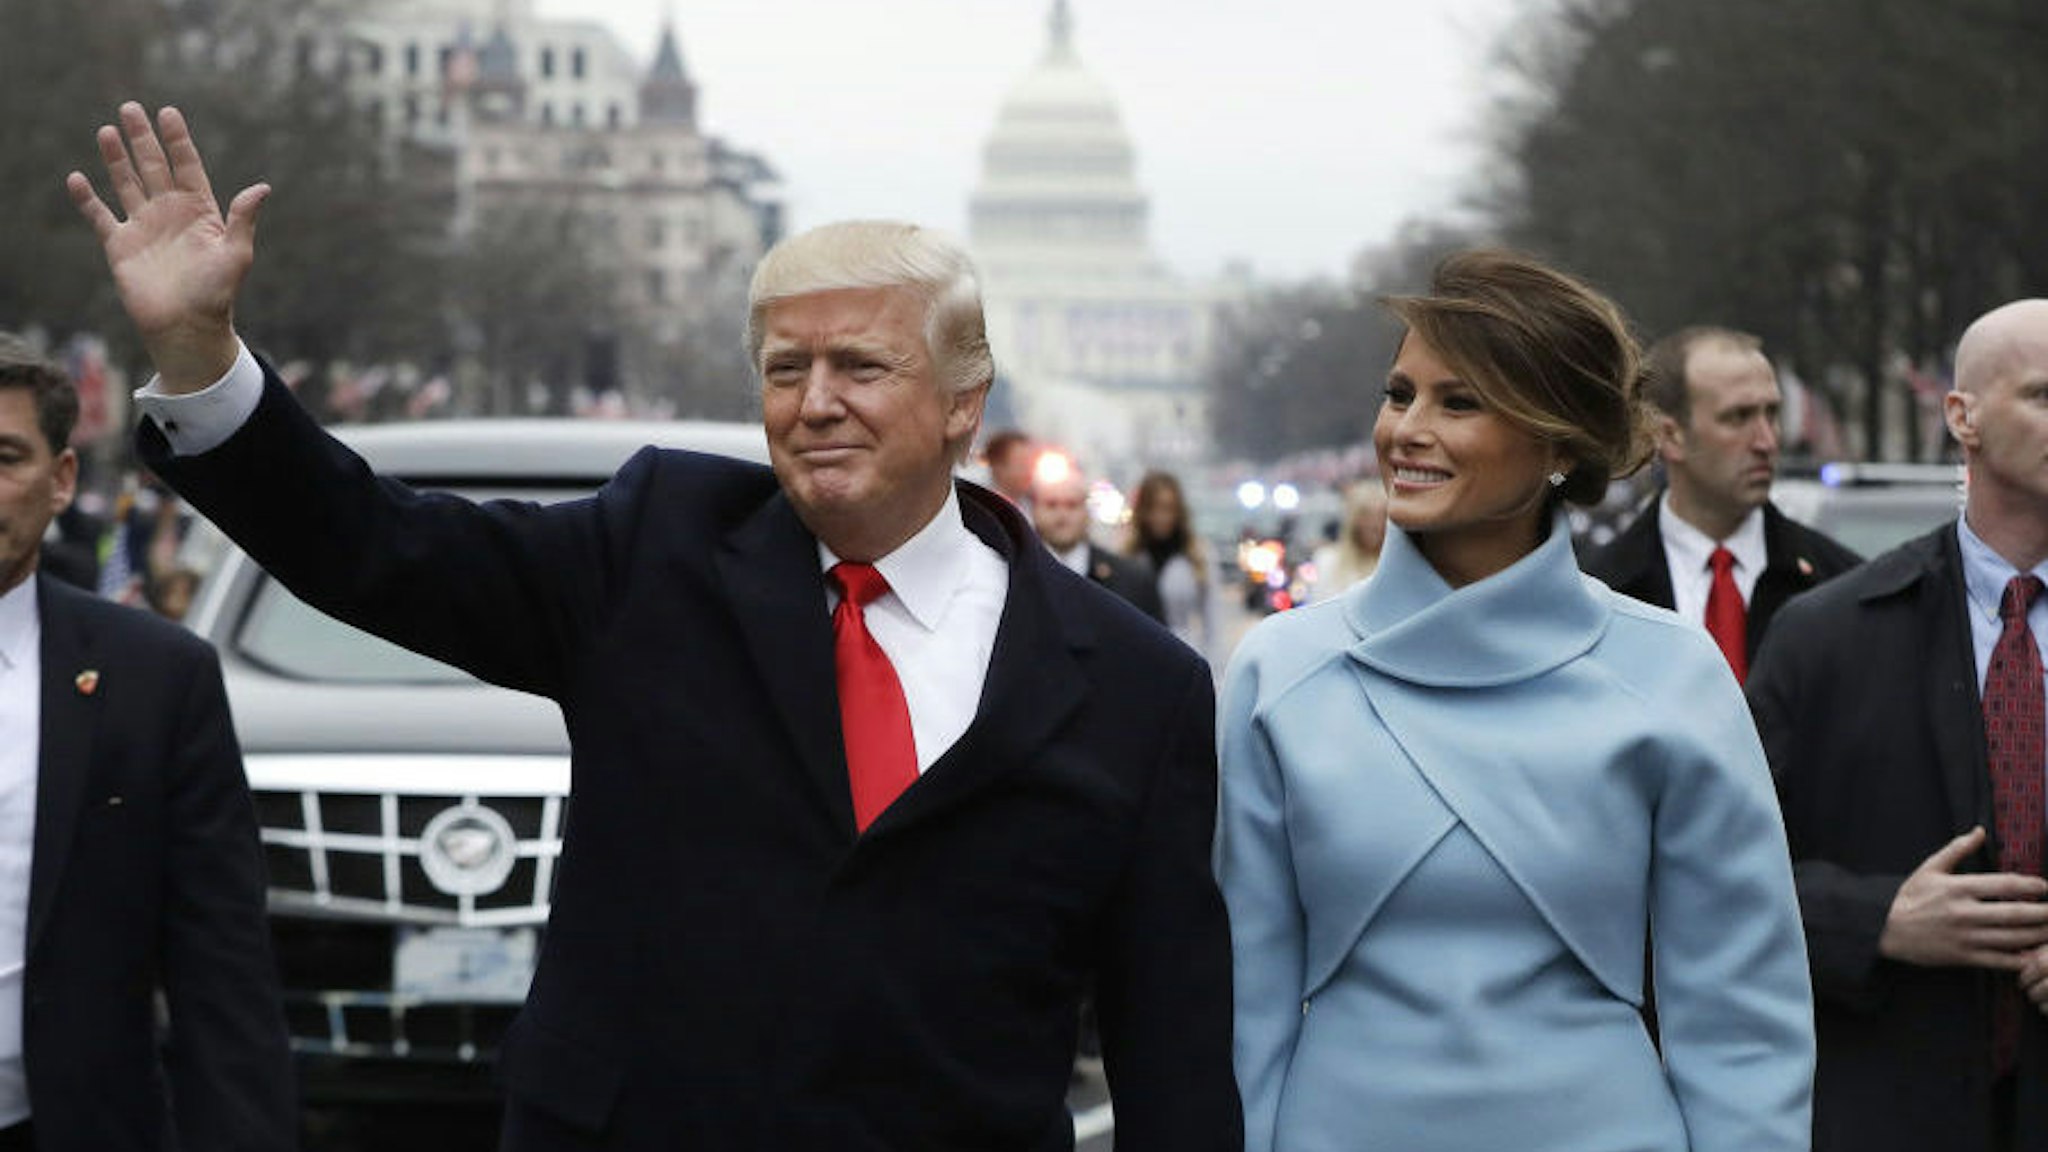 U.S. President Donald Trump waves while walking with U.S. First Lady Melania Trump during a parade following the 58th presidential inauguration in Washington, D.C., U.S., on Friday, Jan. 20, 2017. Monday, January 20, 2020, marks the third anniversary of U.S. President Donald Trump's inauguration. Our editors select the best archive images looking back over Trump’s term in office. Photographer: Evan Vucci/Pool via Bloomberg